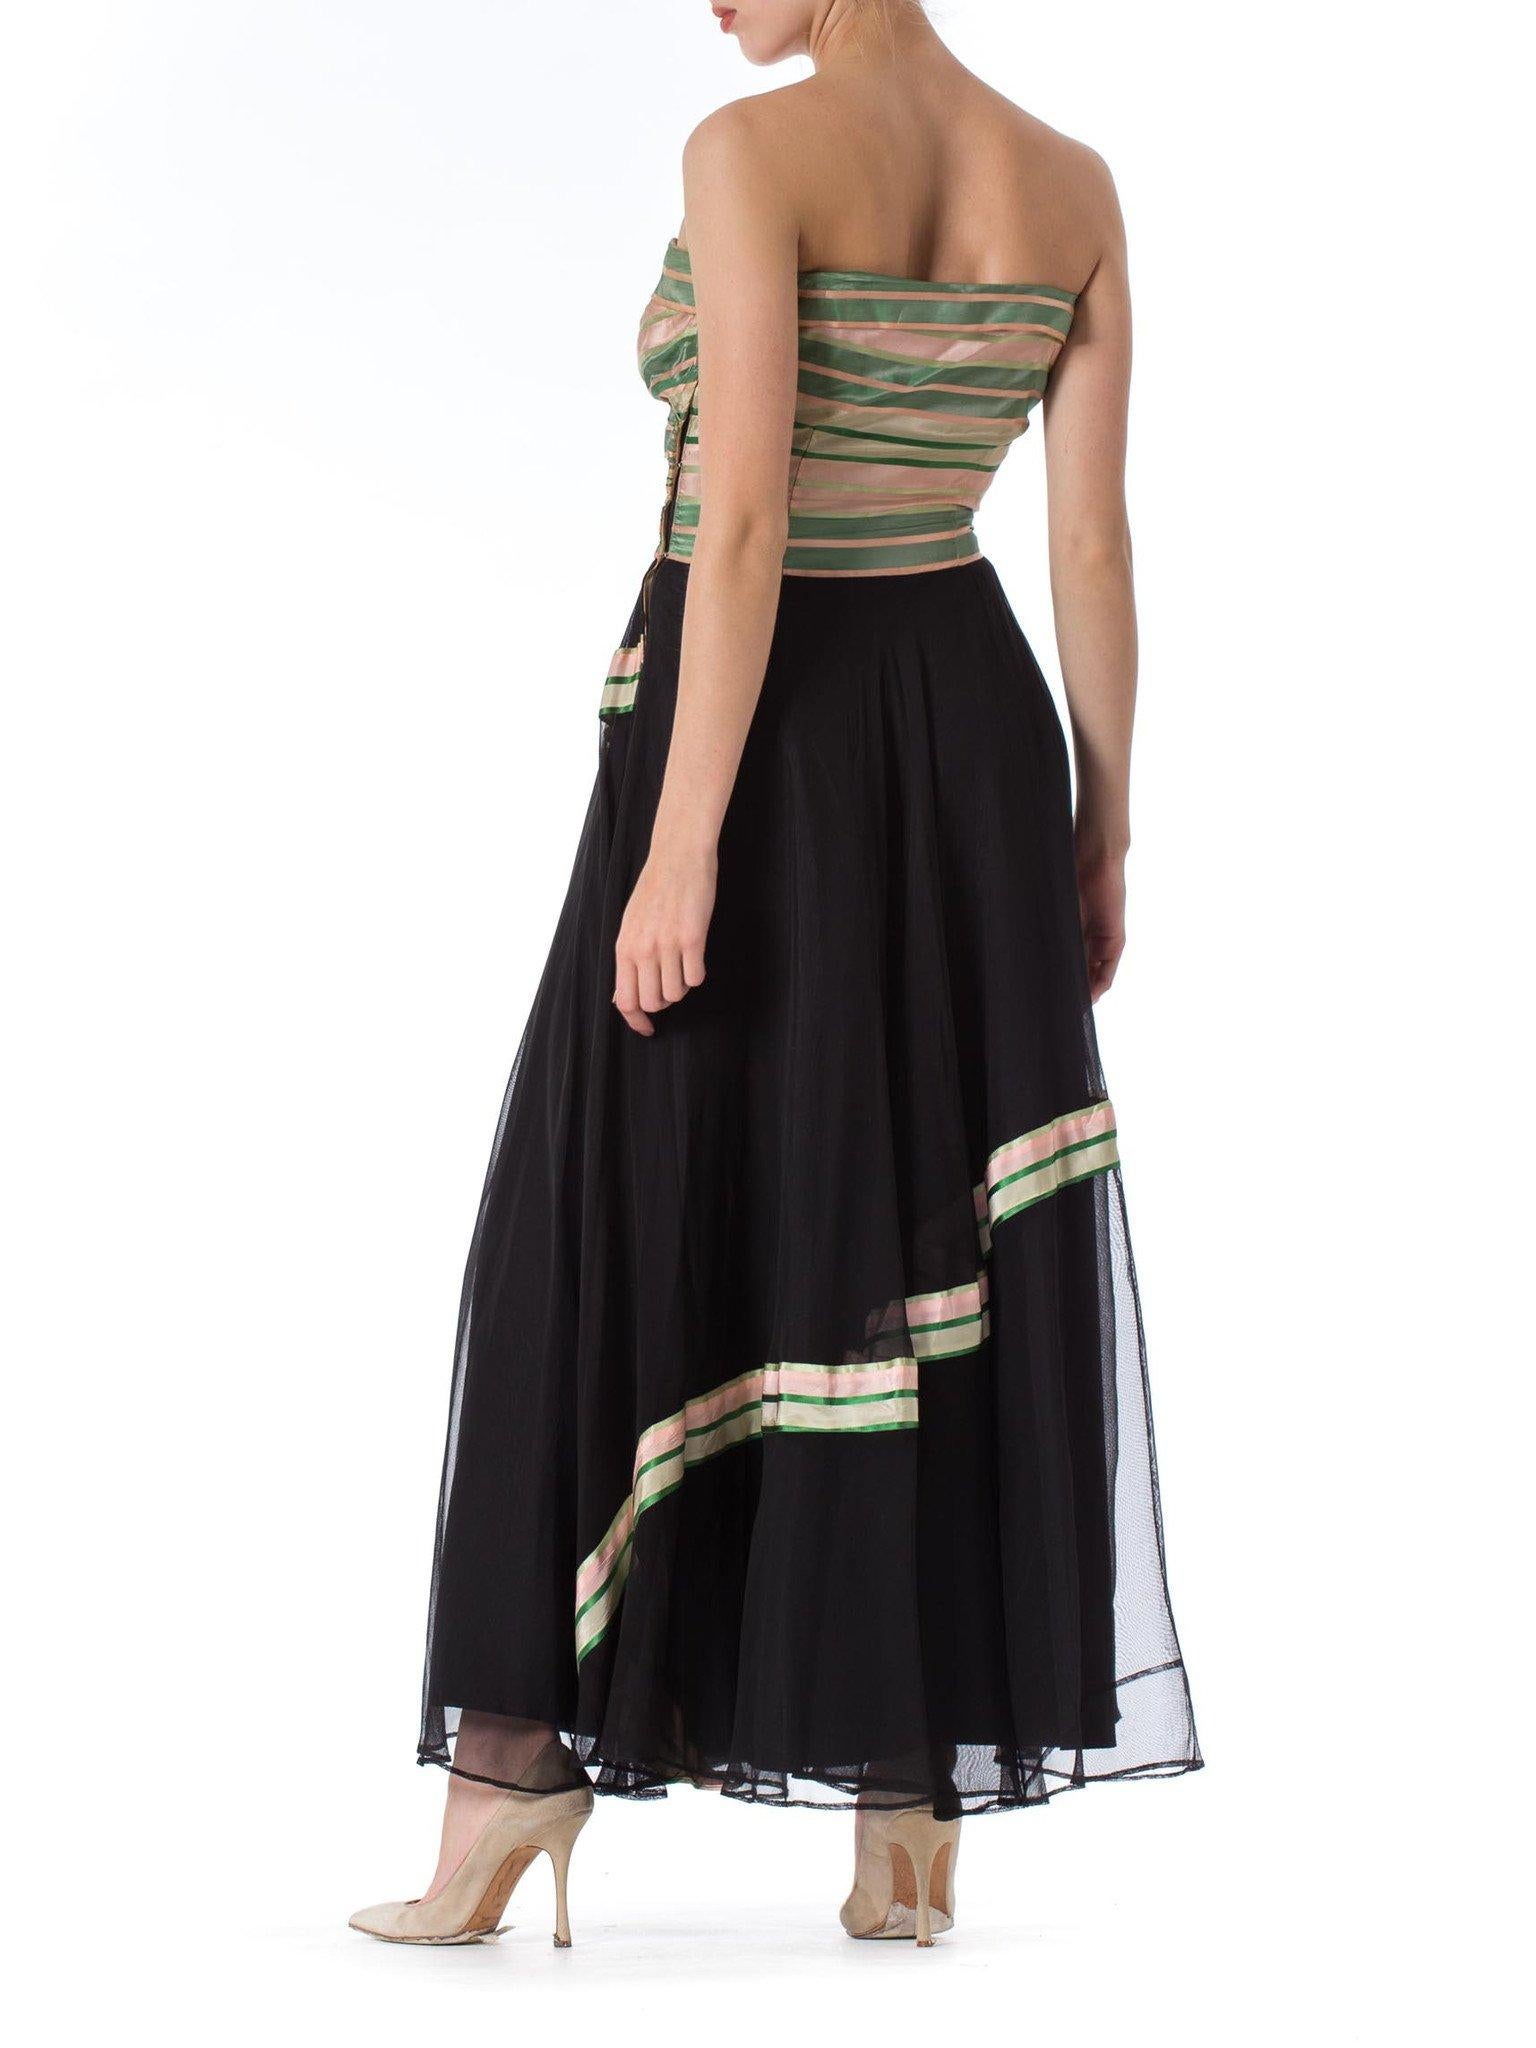 1940S Black Net Strapless Gown With Green & Pink Striped Taffeta Bodice Shawl For Sale 2